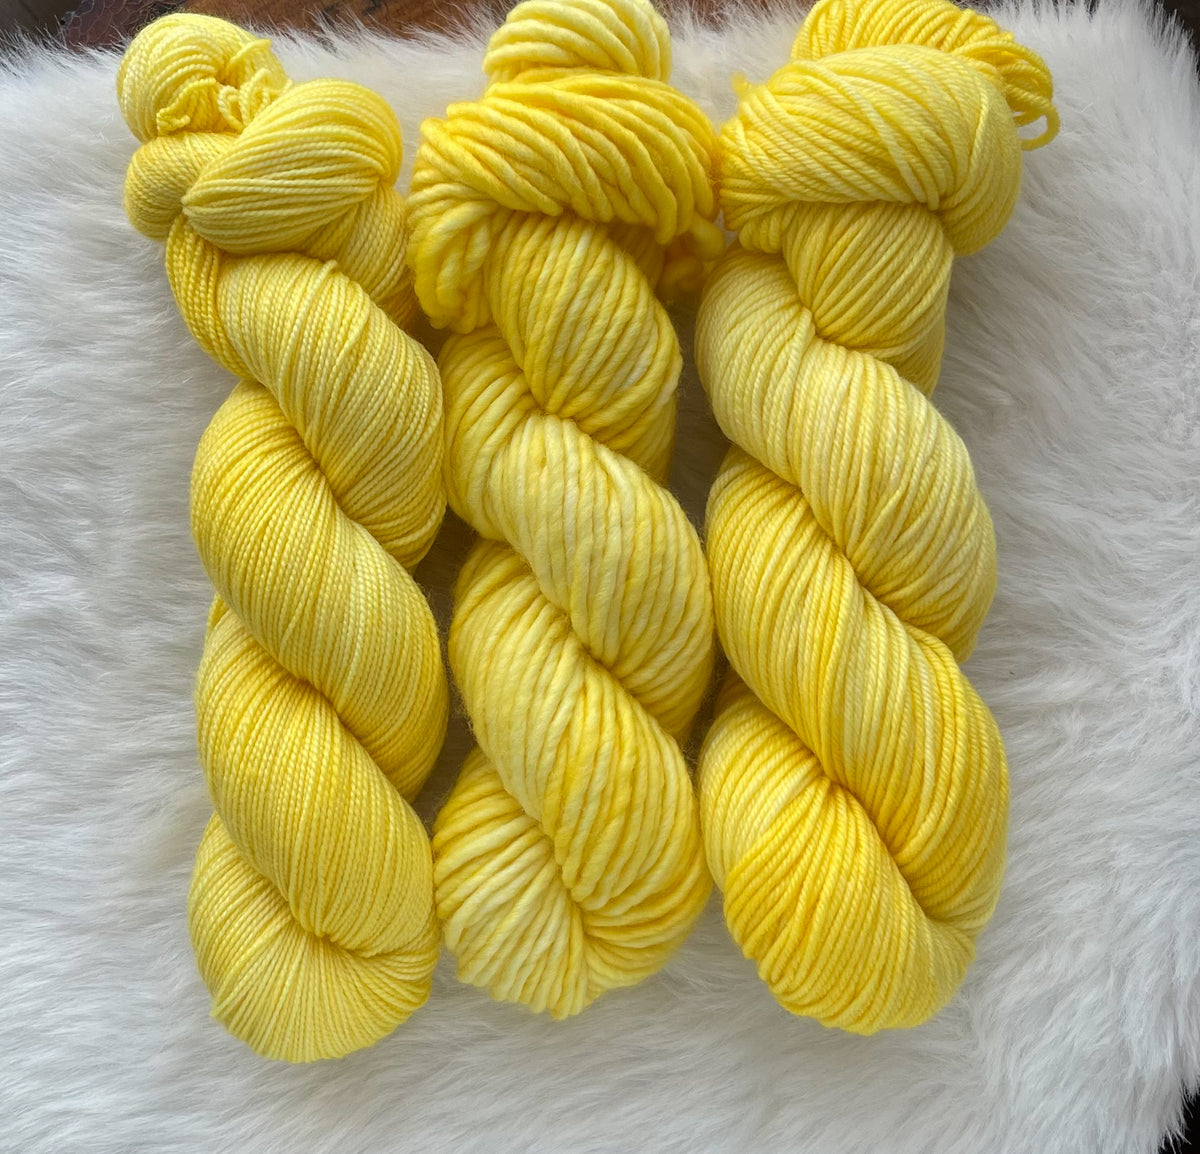 DAFFODIL - Dyed to Order - Hand Dyed Yarn Skein